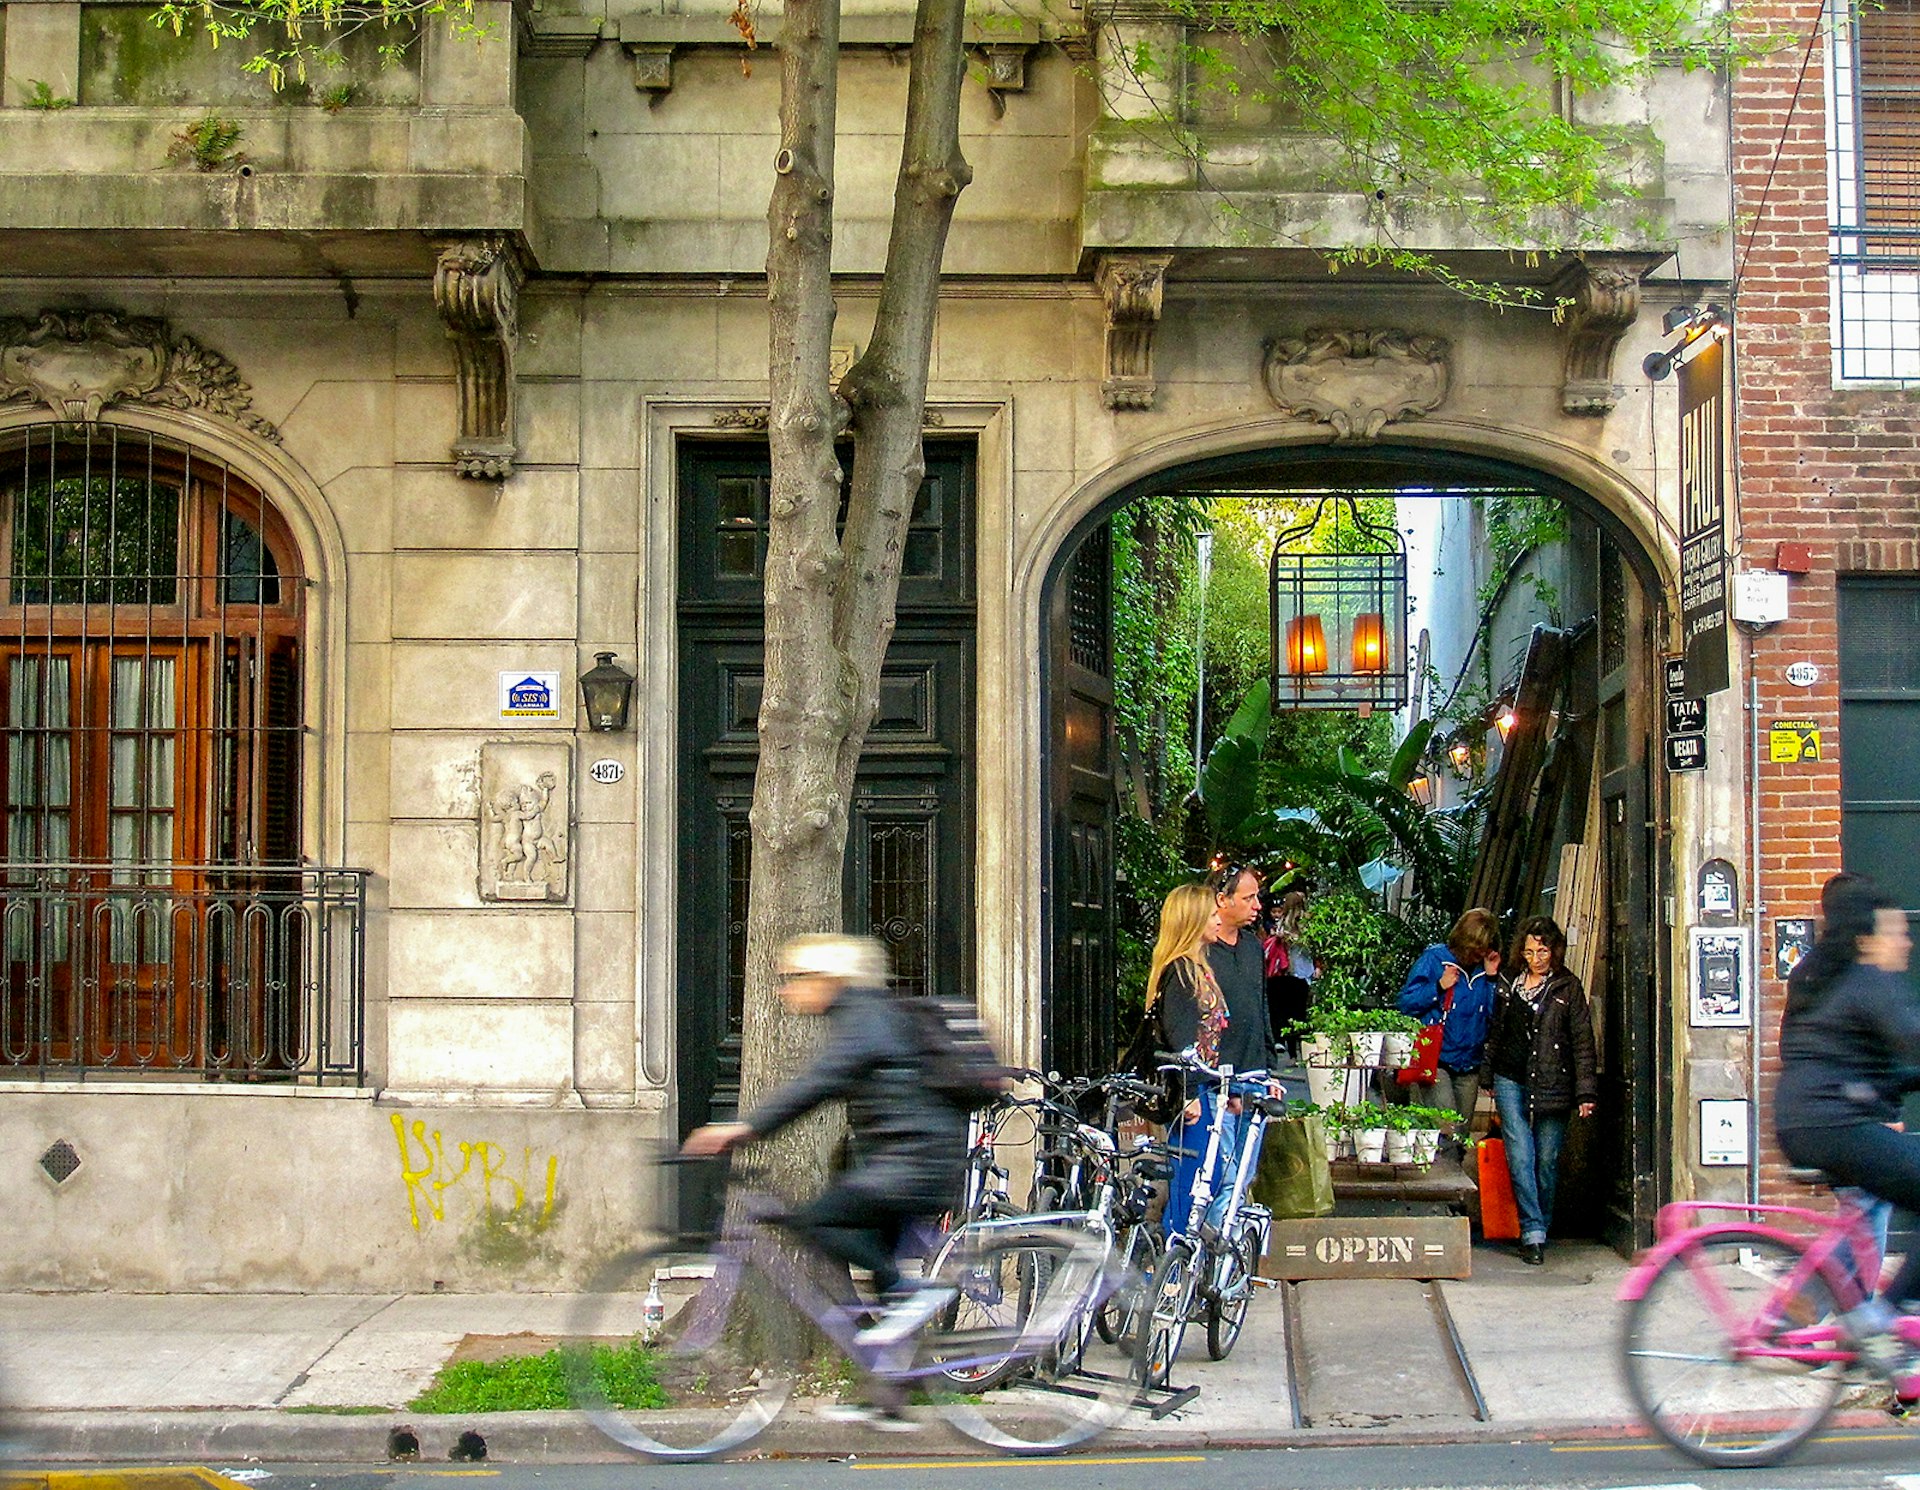 Street scene of people coming out of vine-covered alley with two cyclists zipping by on the street © Bridget Gleeson / Lonely Planet